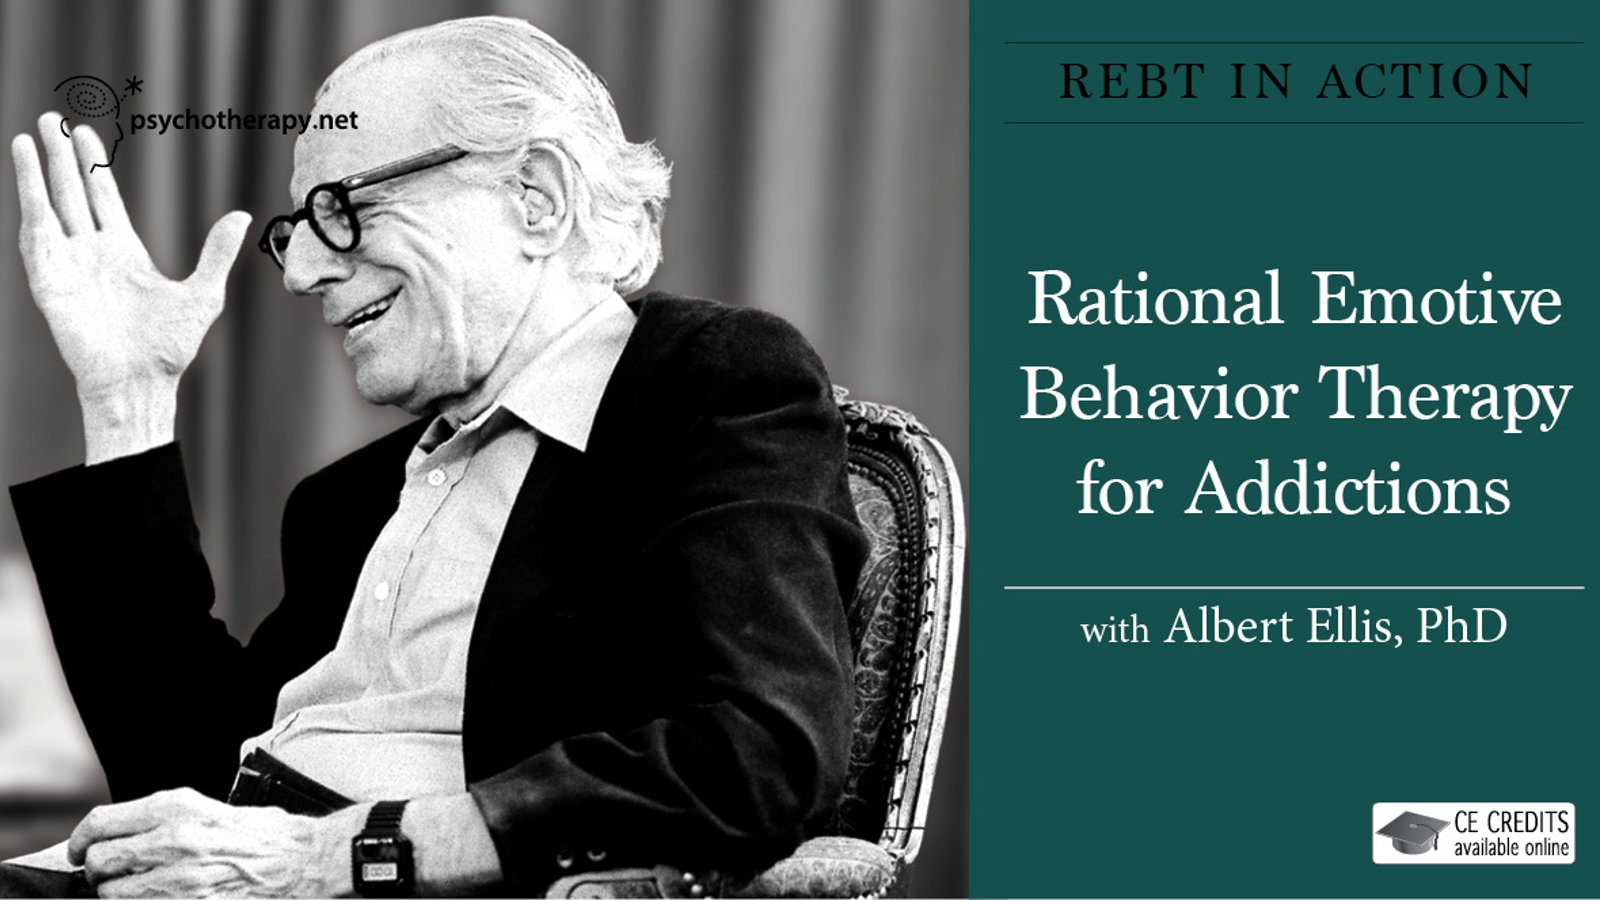 Rational Emotive Behavior Therapy for Addictions - With Albert Ellis